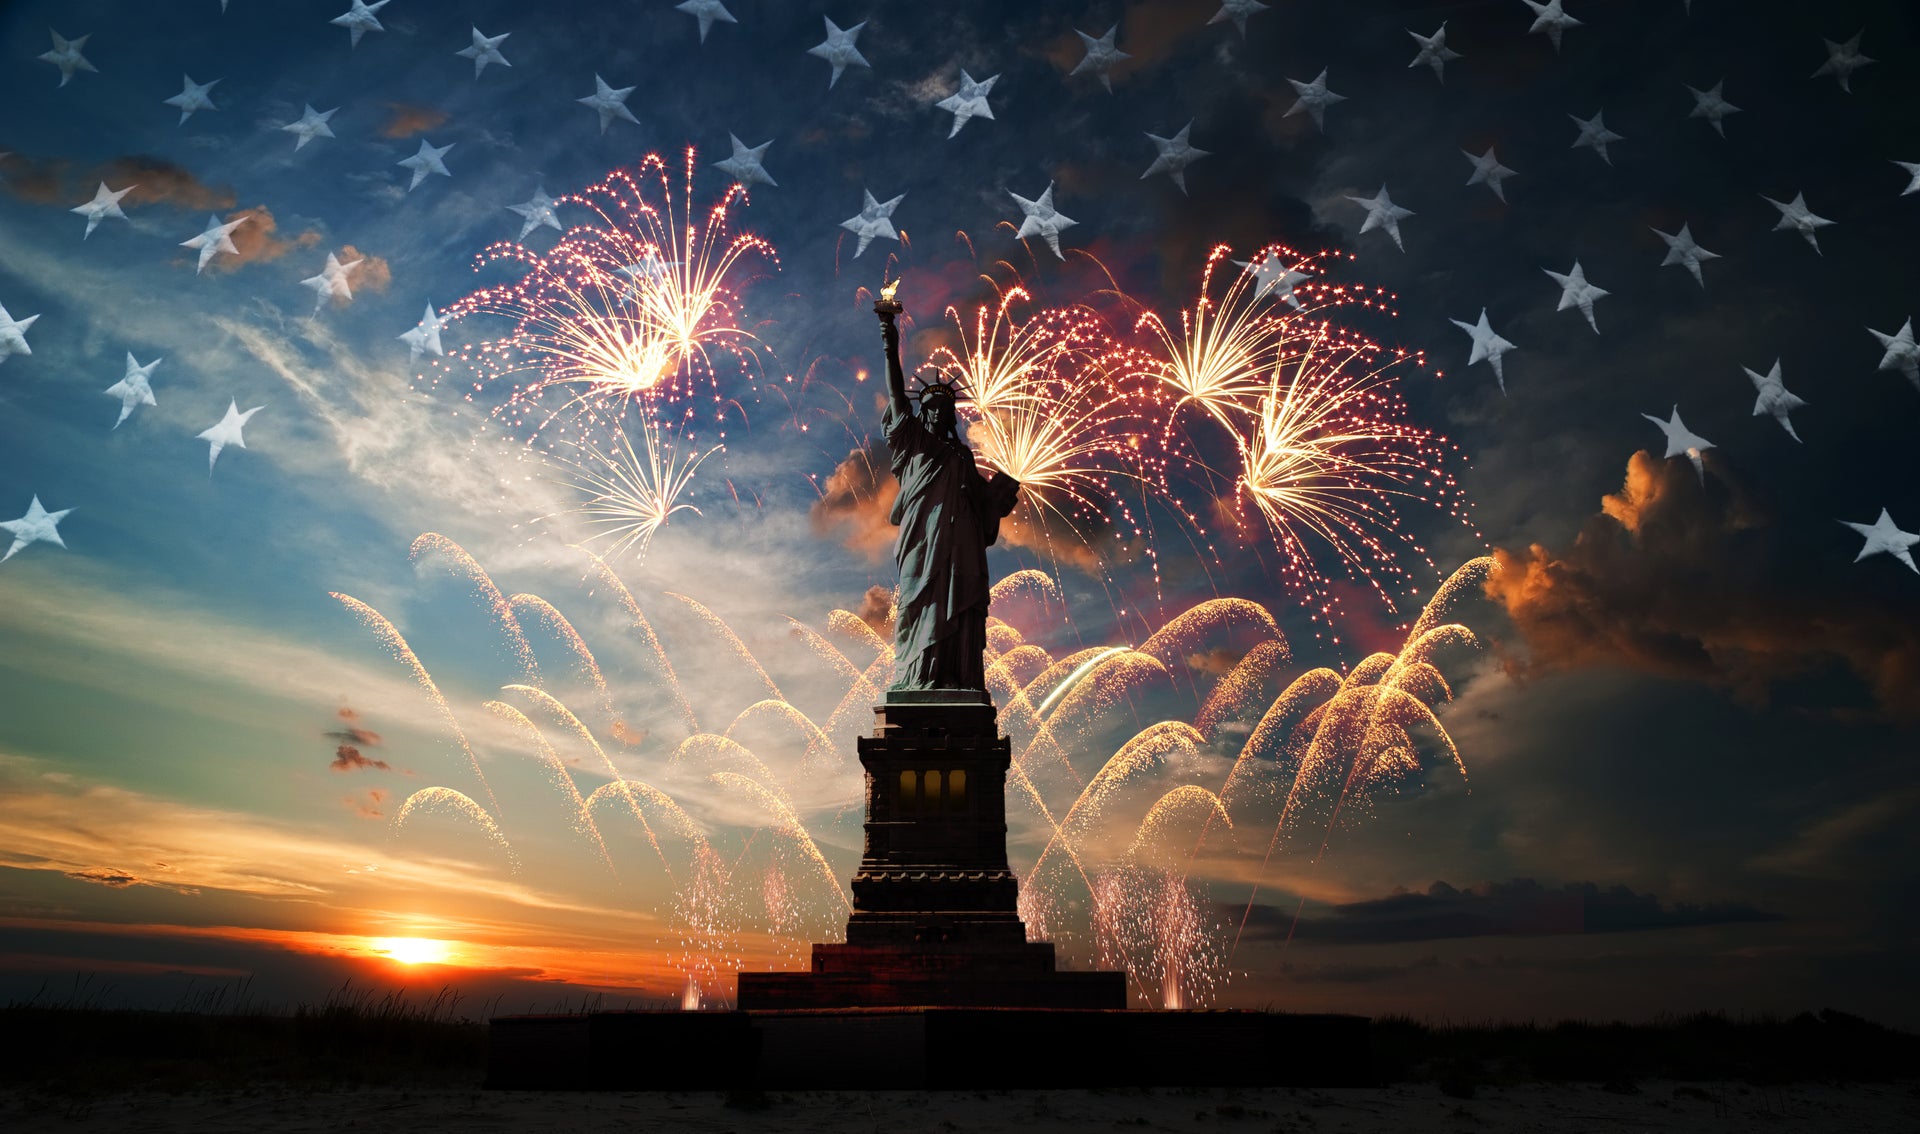 Patriotic image of Fireworks and the Statue of Liberty - Crosscountrycreations